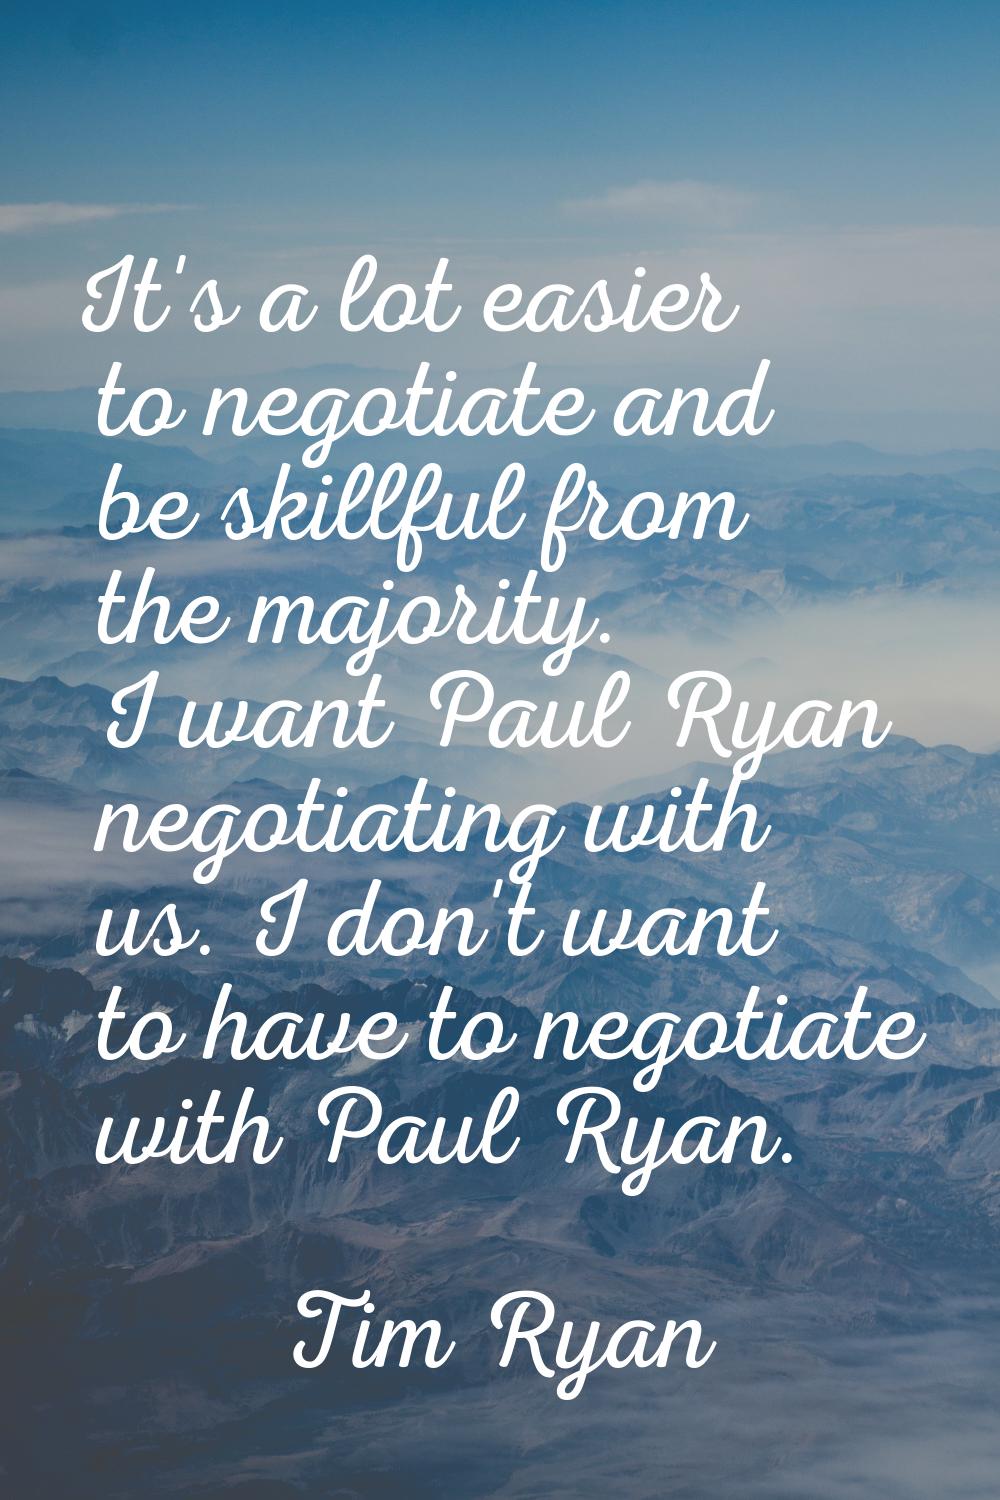 It's a lot easier to negotiate and be skillful from the majority. I want Paul Ryan negotiating with